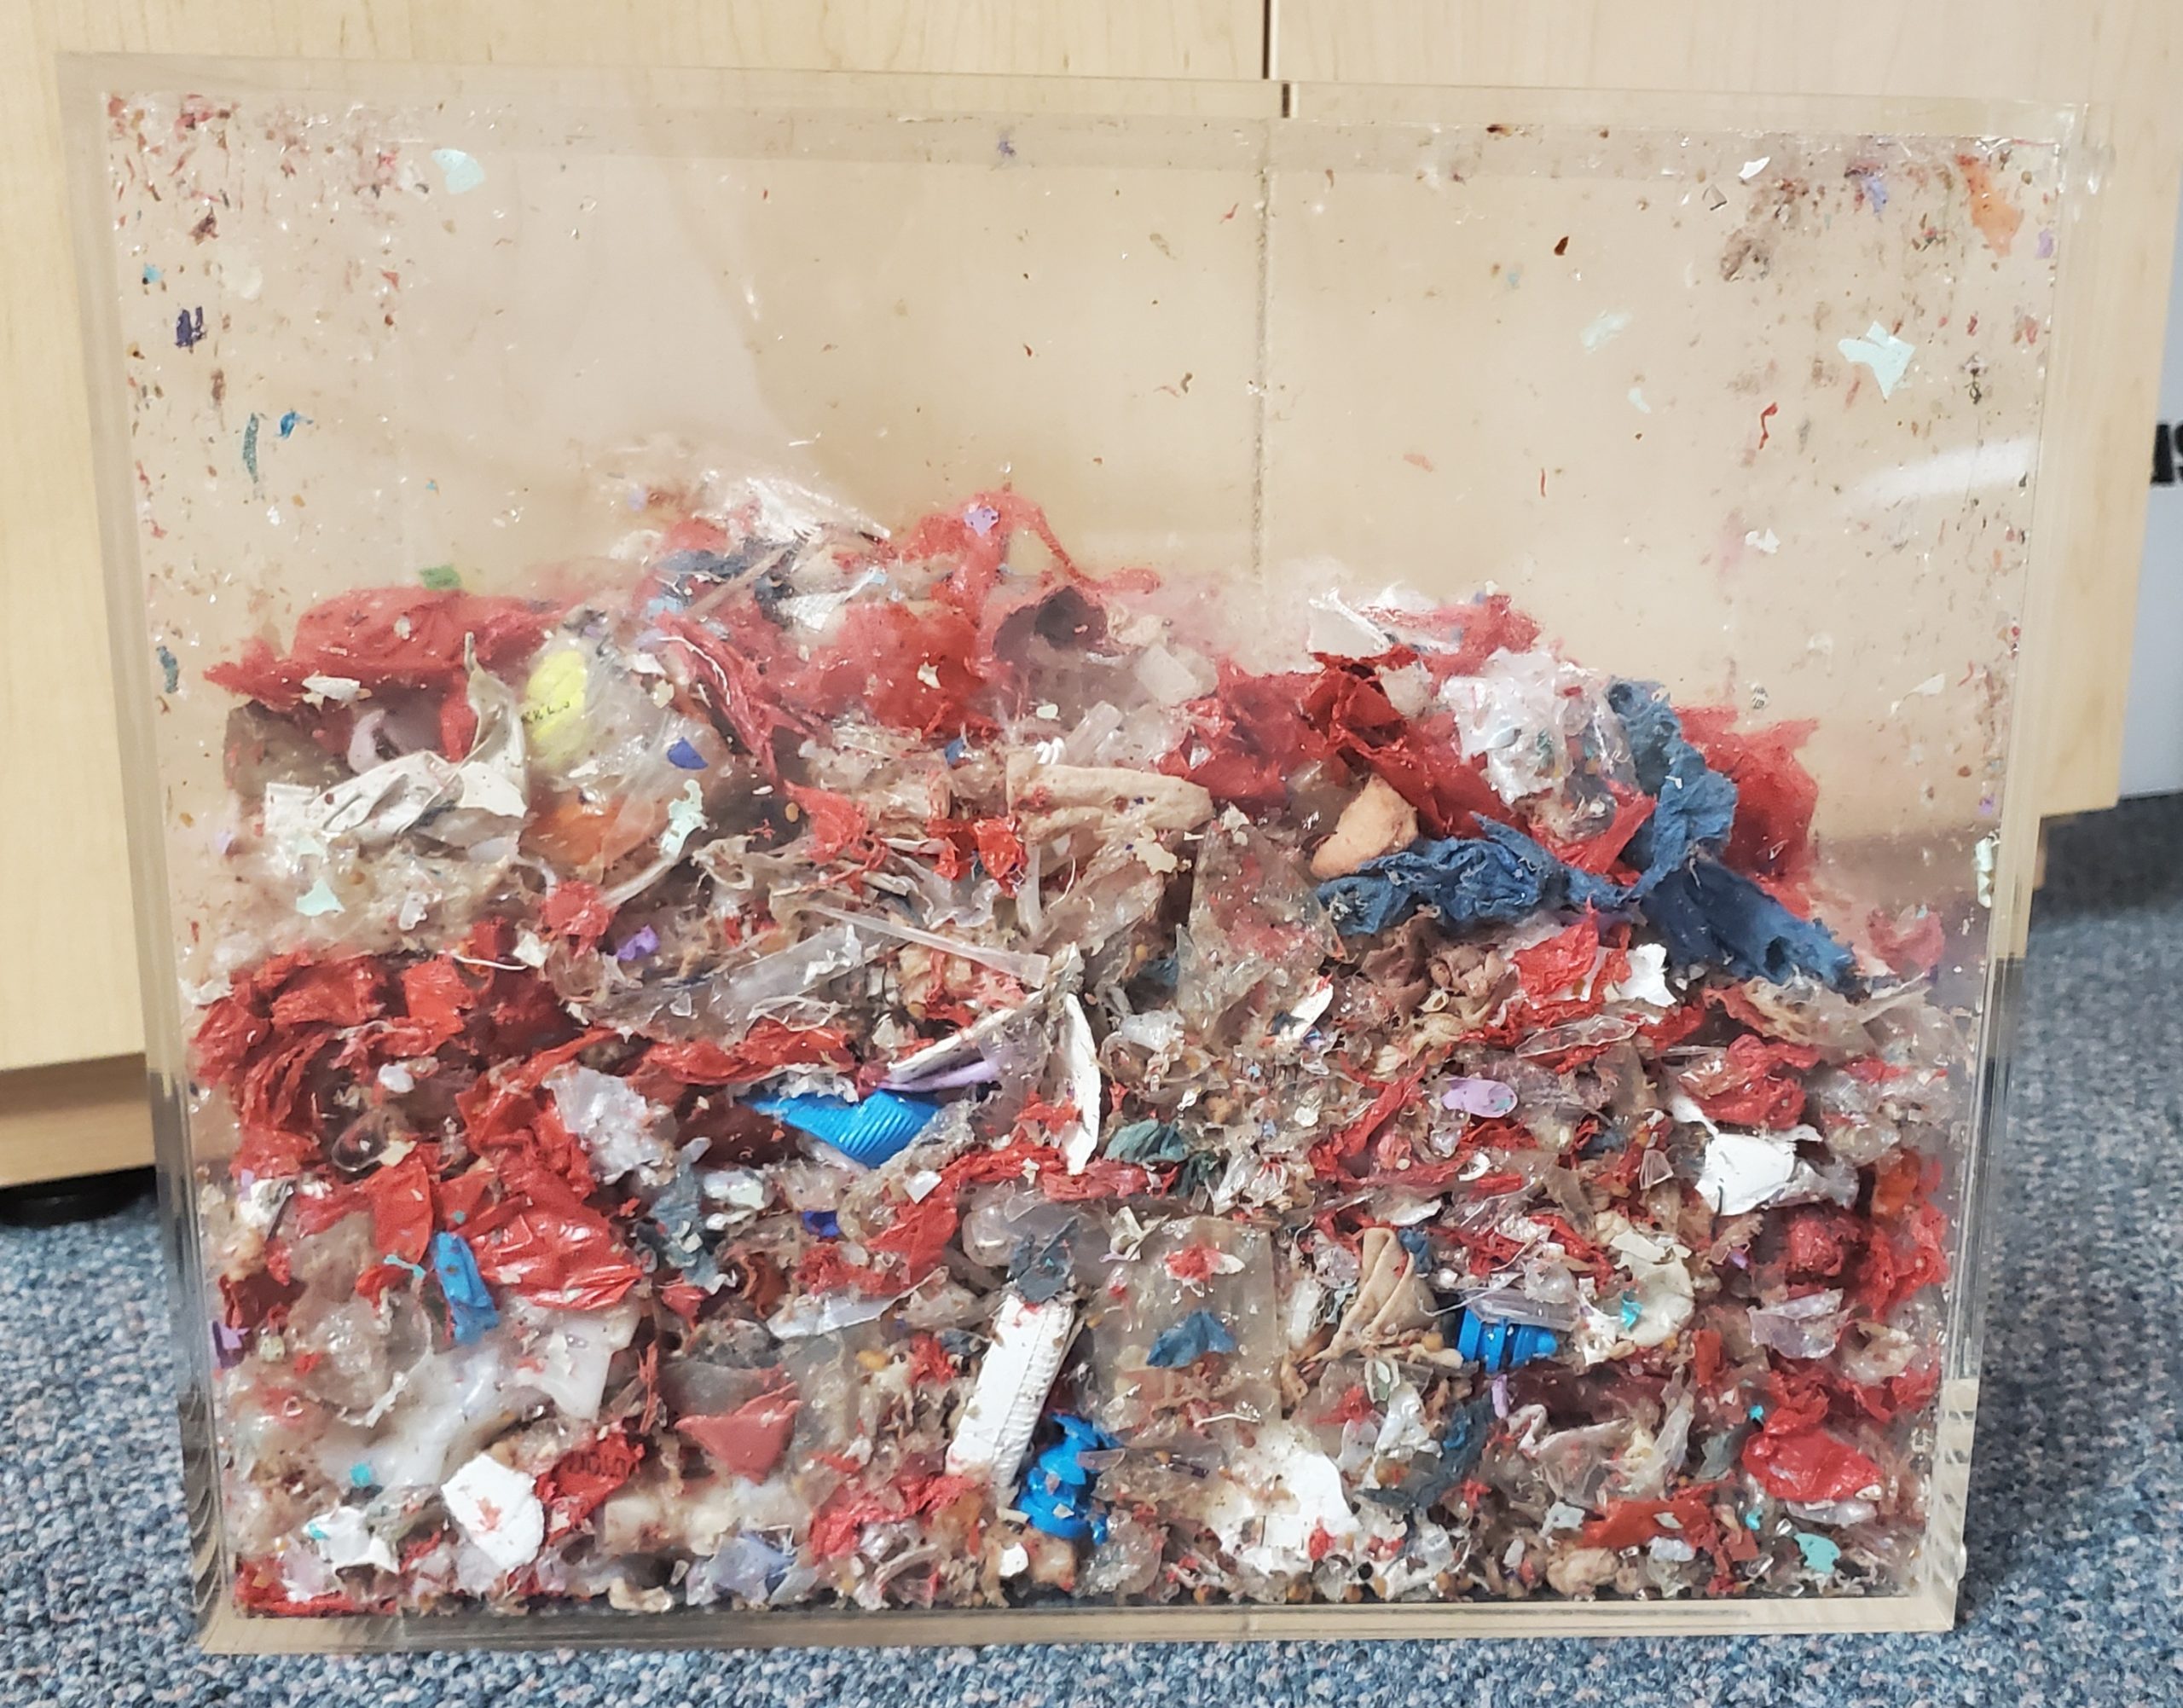 Shredded medical waste after being disinfected